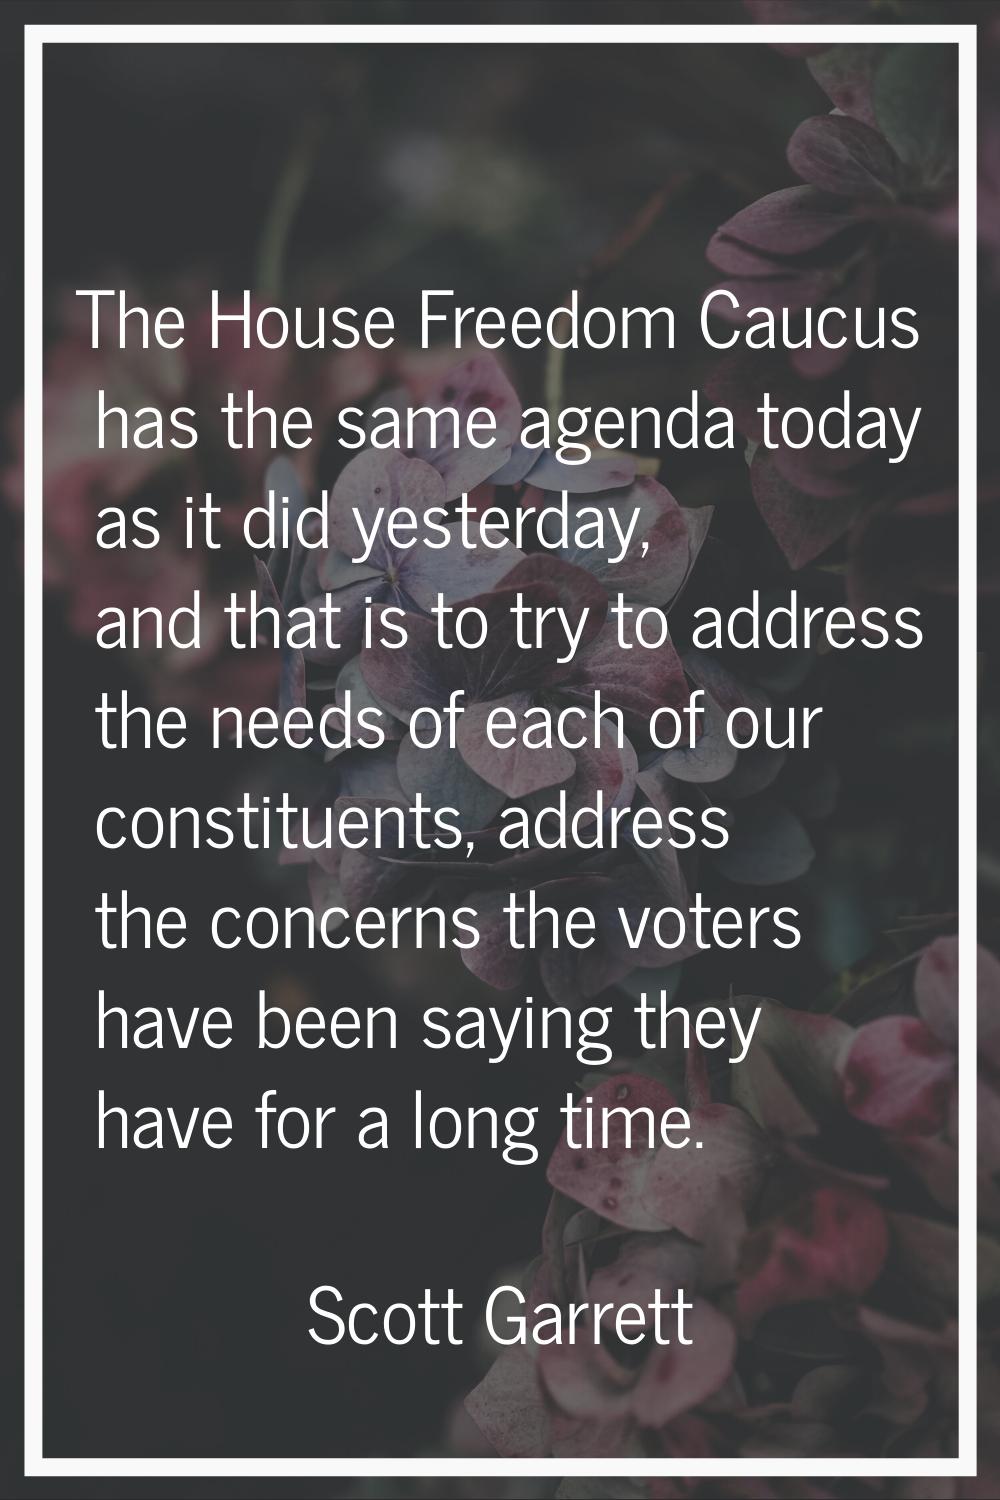 The House Freedom Caucus has the same agenda today as it did yesterday, and that is to try to addre